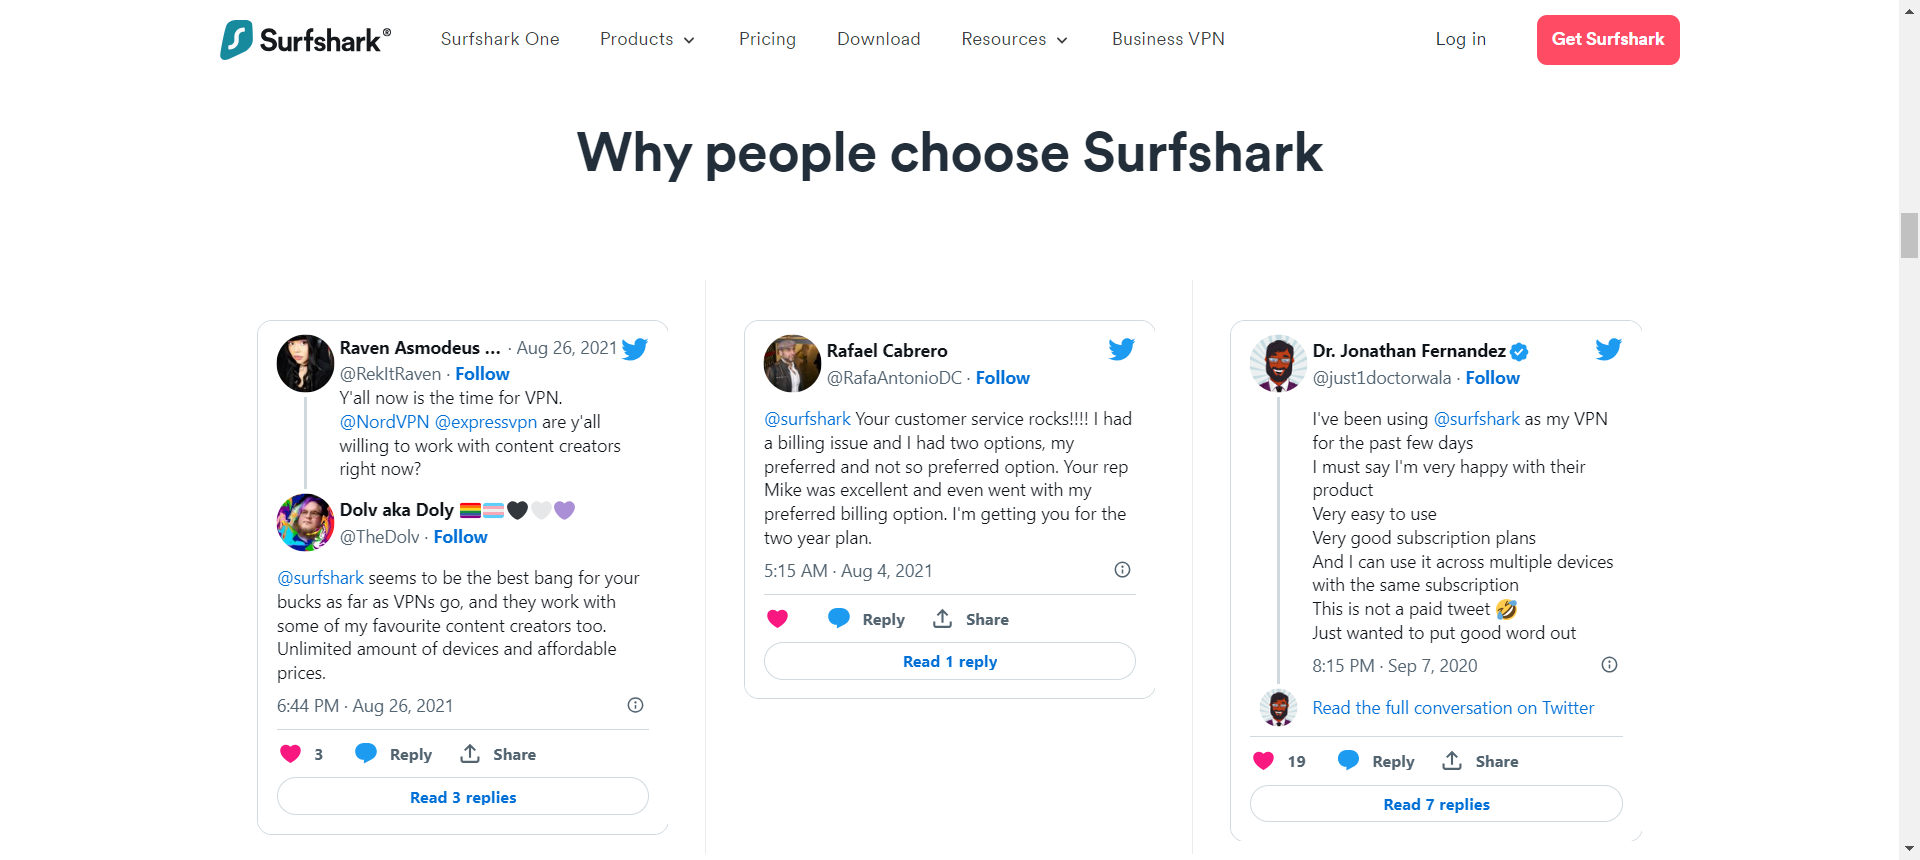 Surfshark Reviews by Users